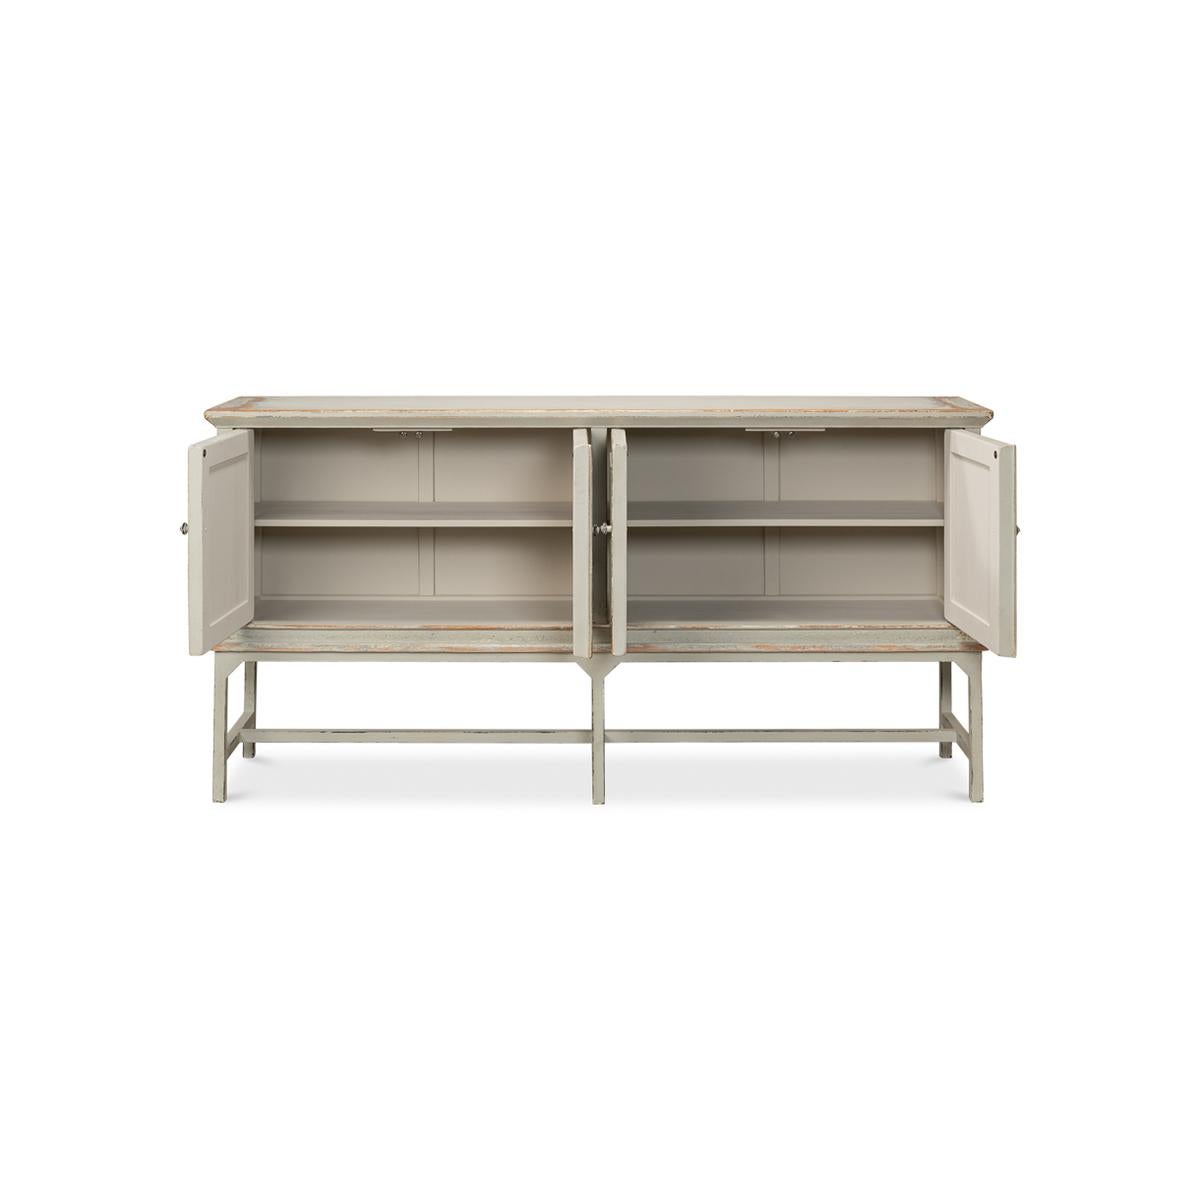 Asian Rustic Gray Painted Sideboard For Sale